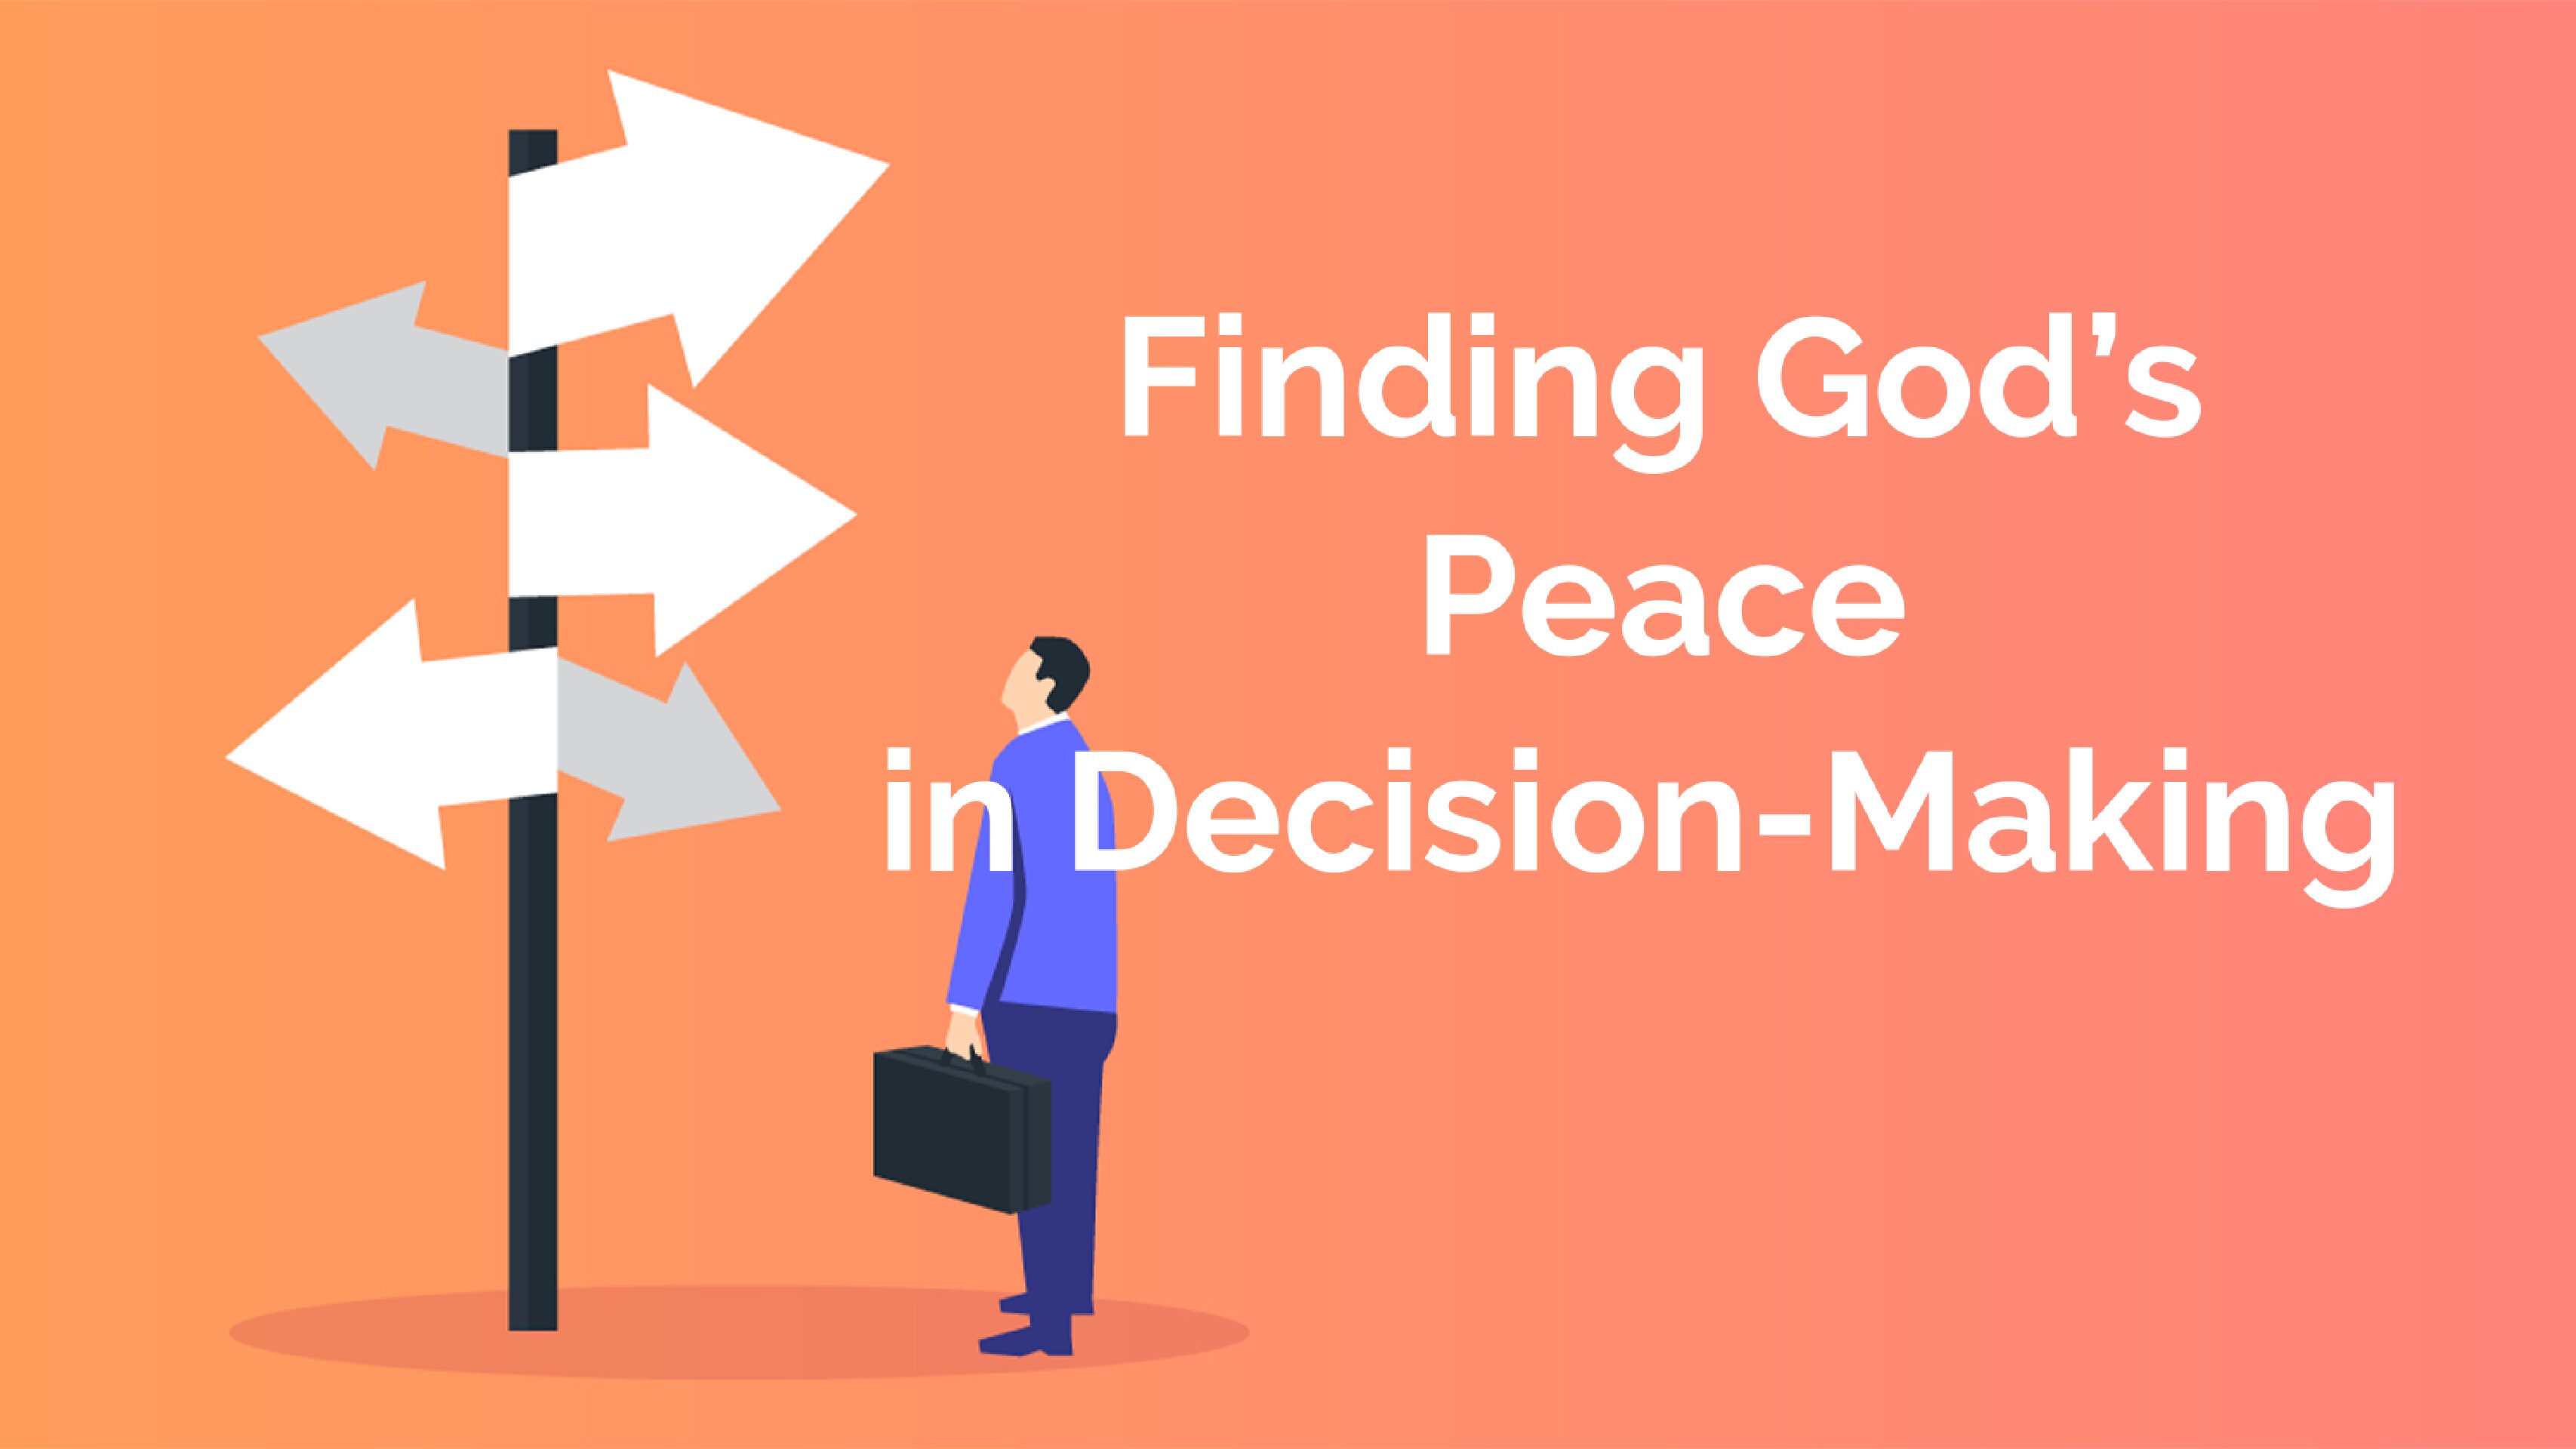 Finding God’s Peace in Decision-Making